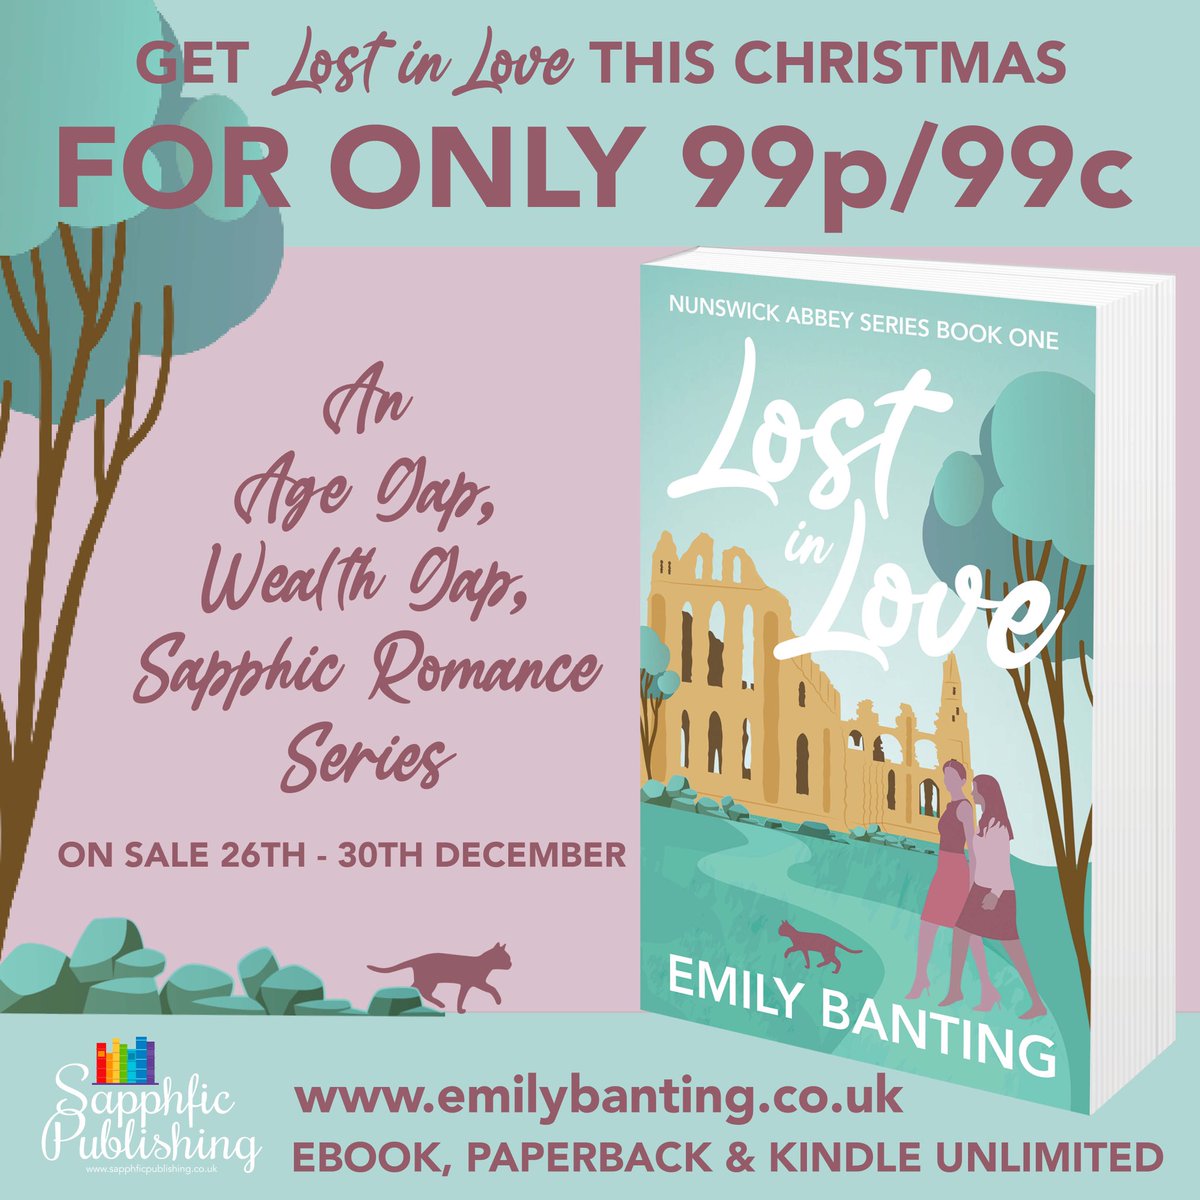 Get Lost in Love this Christmas for only 99c. On sale now until 30th December books2read.com/lostinlove #lgbtbooks #lesfic #sapphicromance #lesbianfiction #lesbianromance #sapphic #wlw #wlwromance #agegap